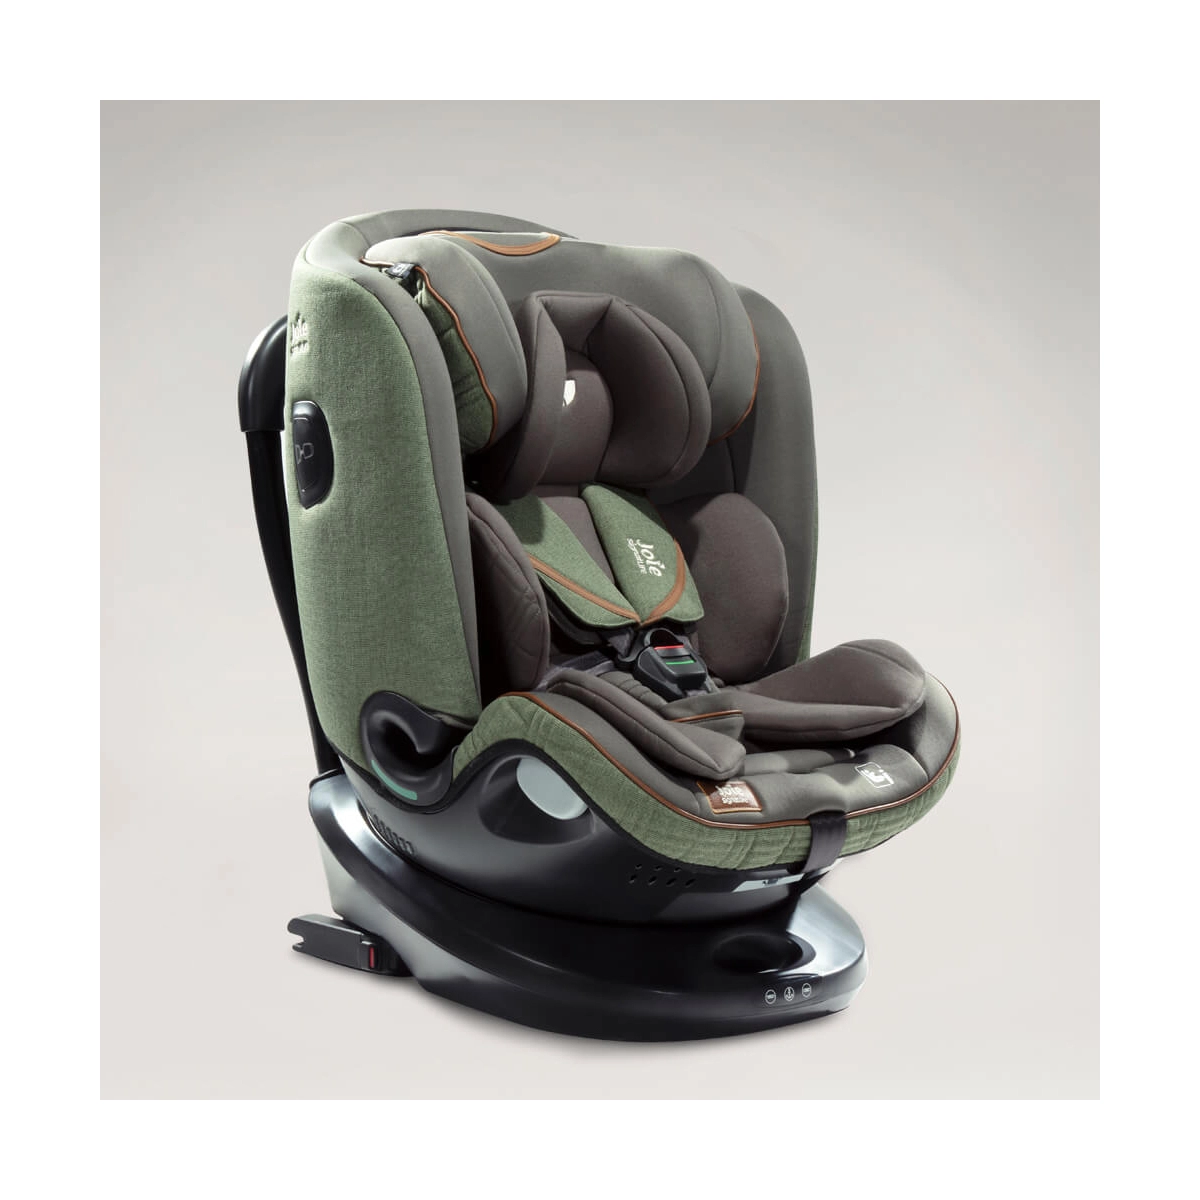 Joie i-Spin Grow Signature Car Seat